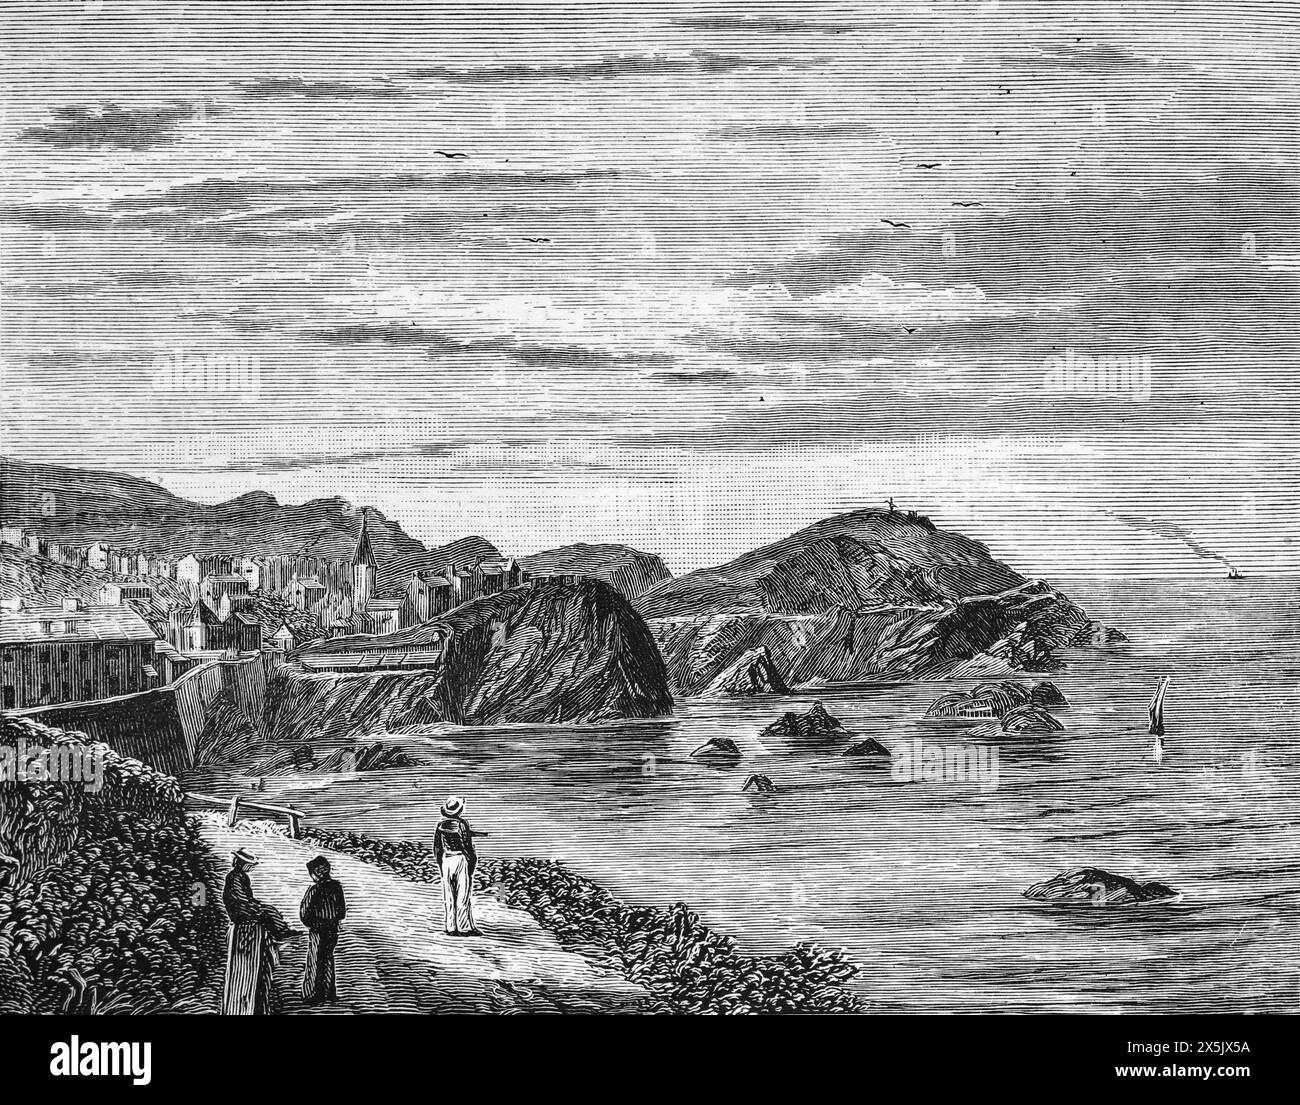 View of Ilfracombe, North Devon from Lantern Hill. As it appeared in the late 19th century. Black and White Illustration from Our Own Country Vol III published by Cassell, Petter, Galpin & Co. in the late 19th century. Stock Photo